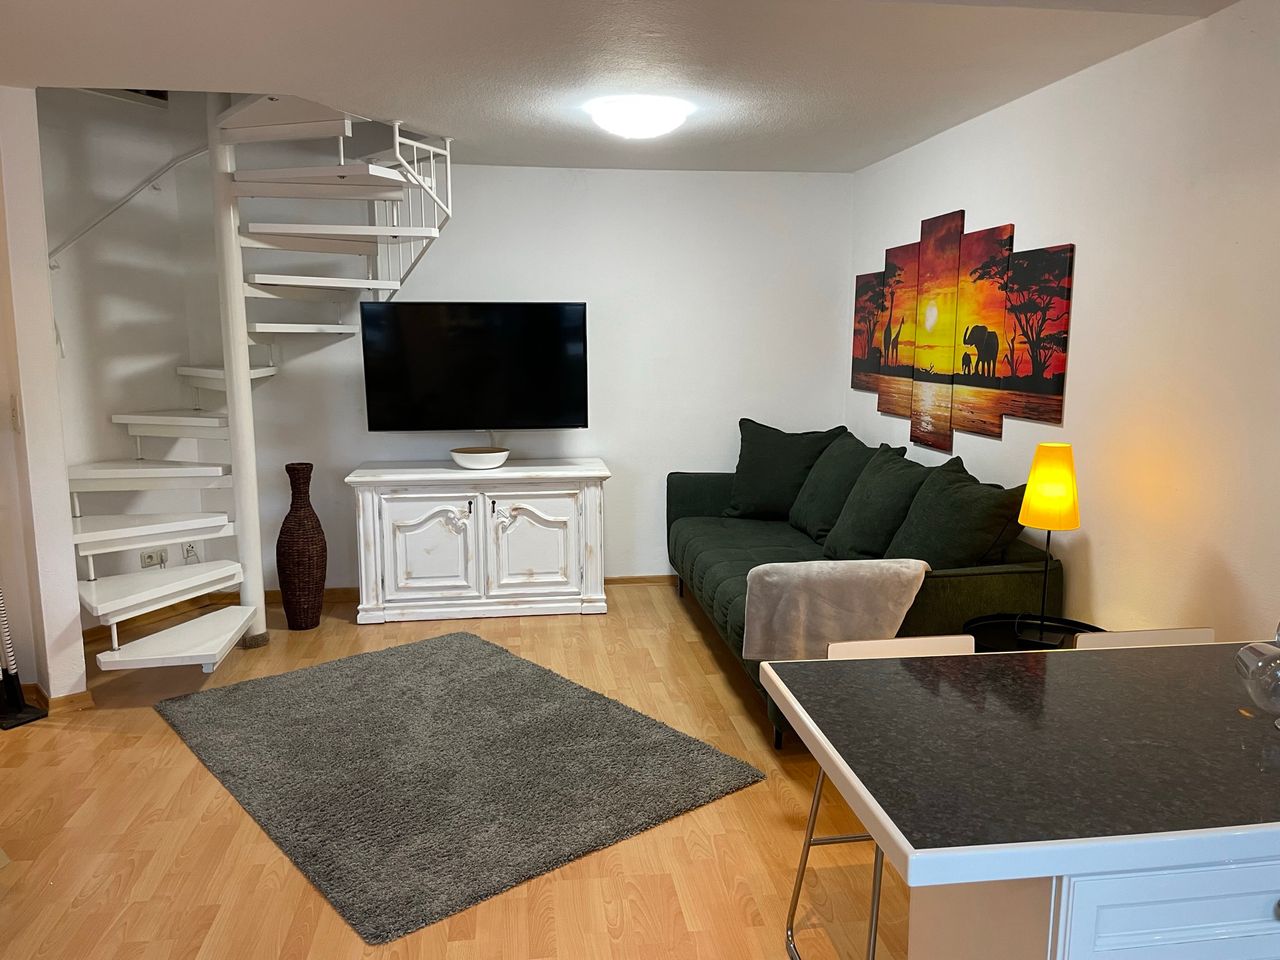 Beautiful furnished apartment with rooftop terrace, includes free parking in underground garage - 20 mins to Centre Munich